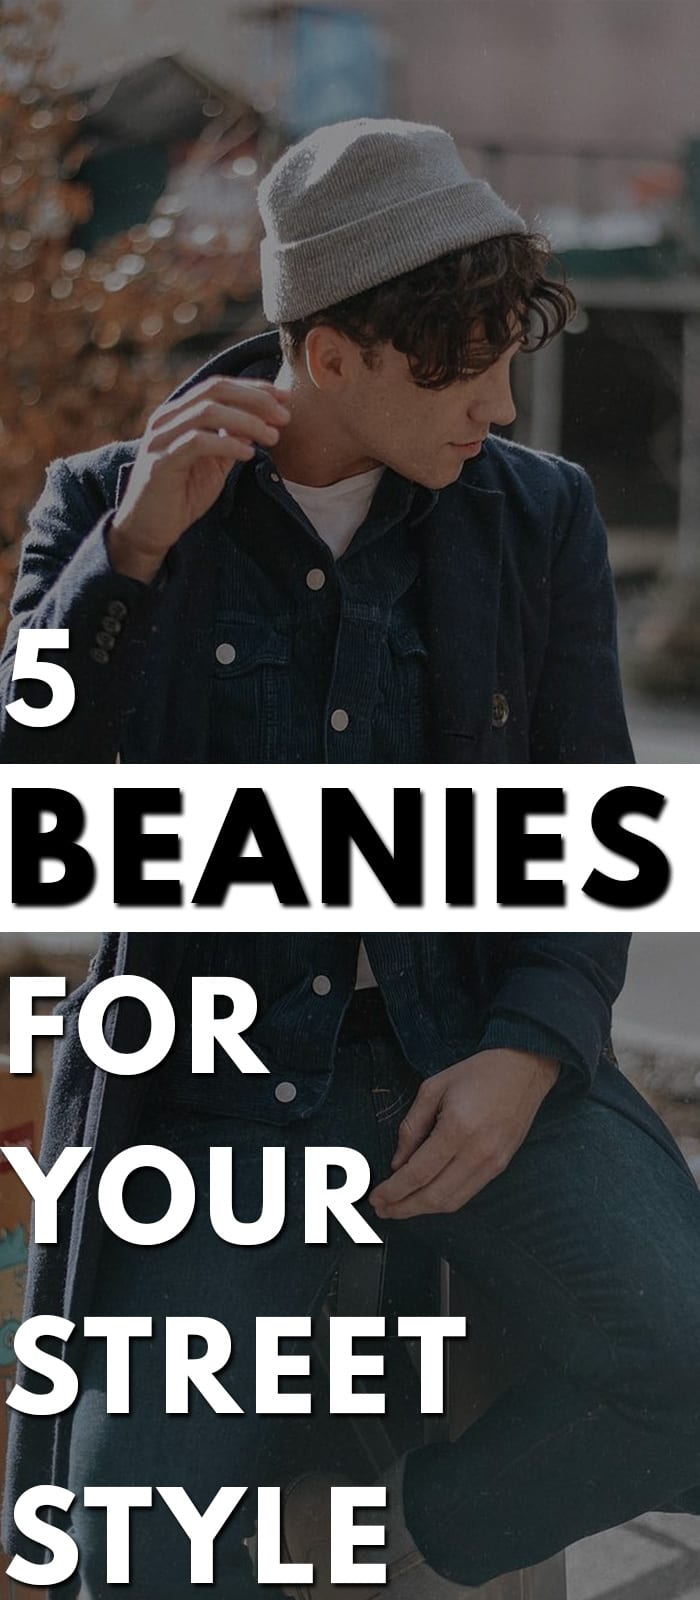 Beanies For Your Street Style